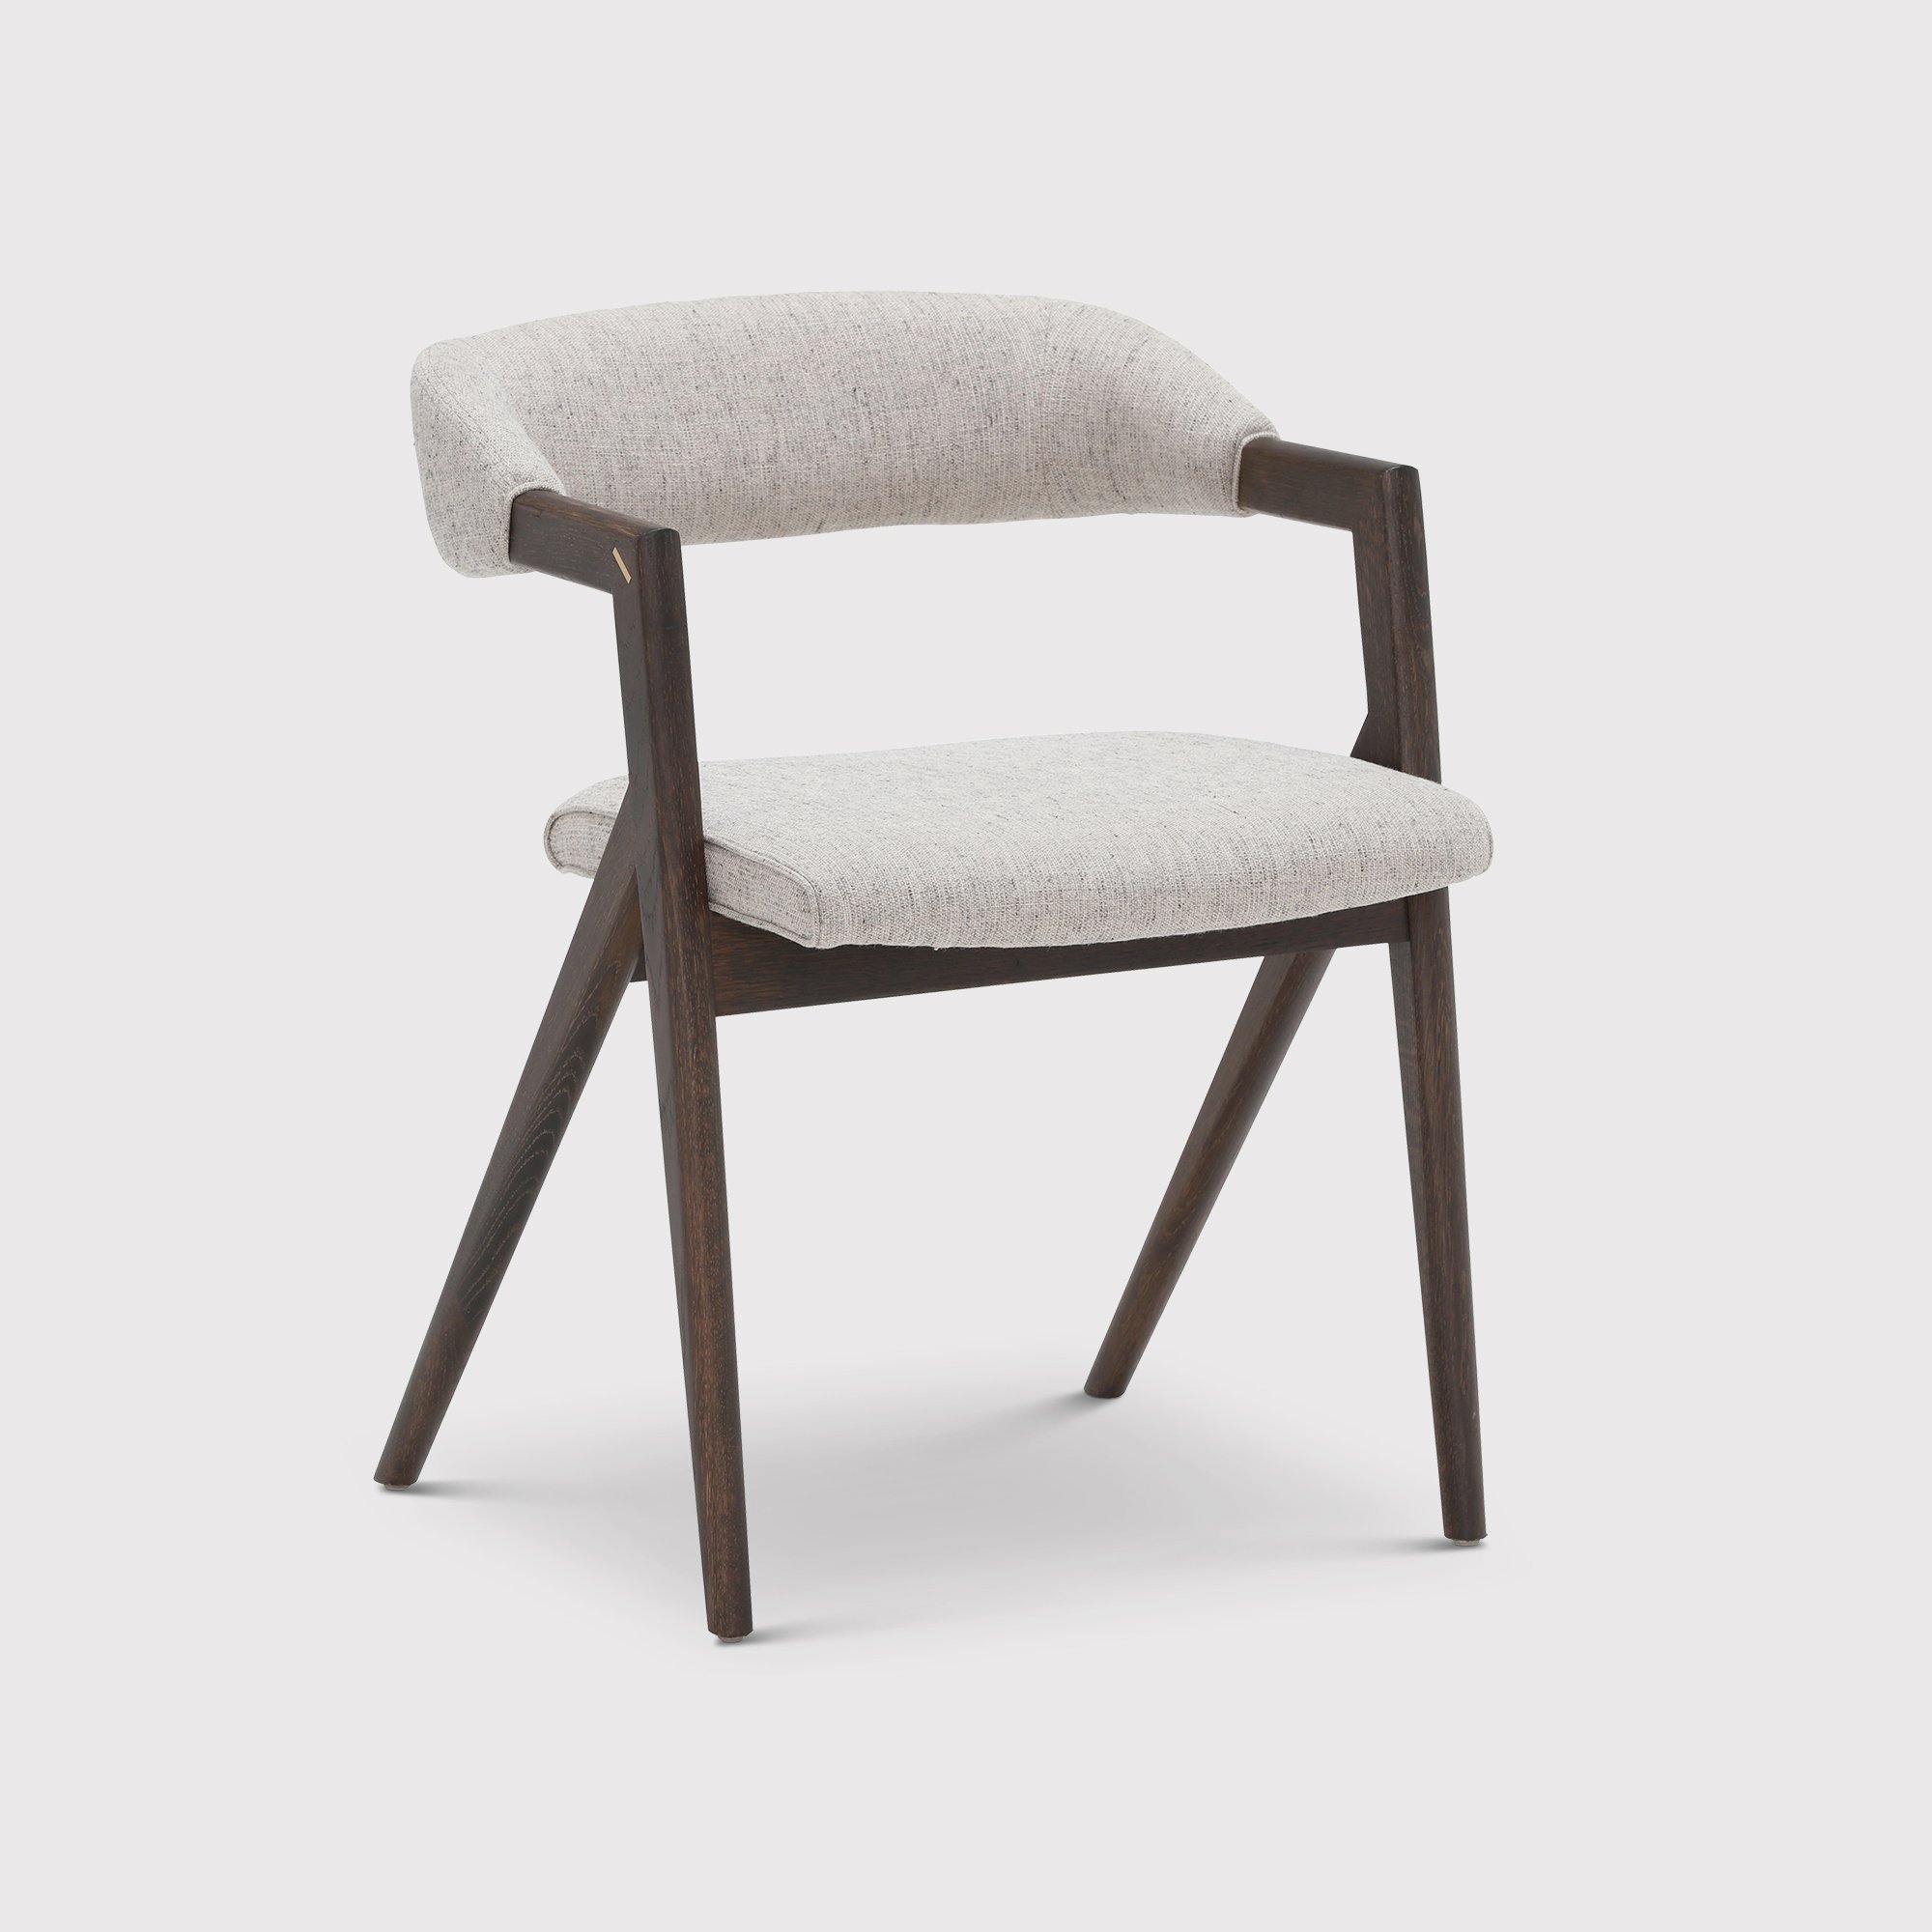 Zora Dining Dining Chair With Arms, White | Barker & Stonehouse